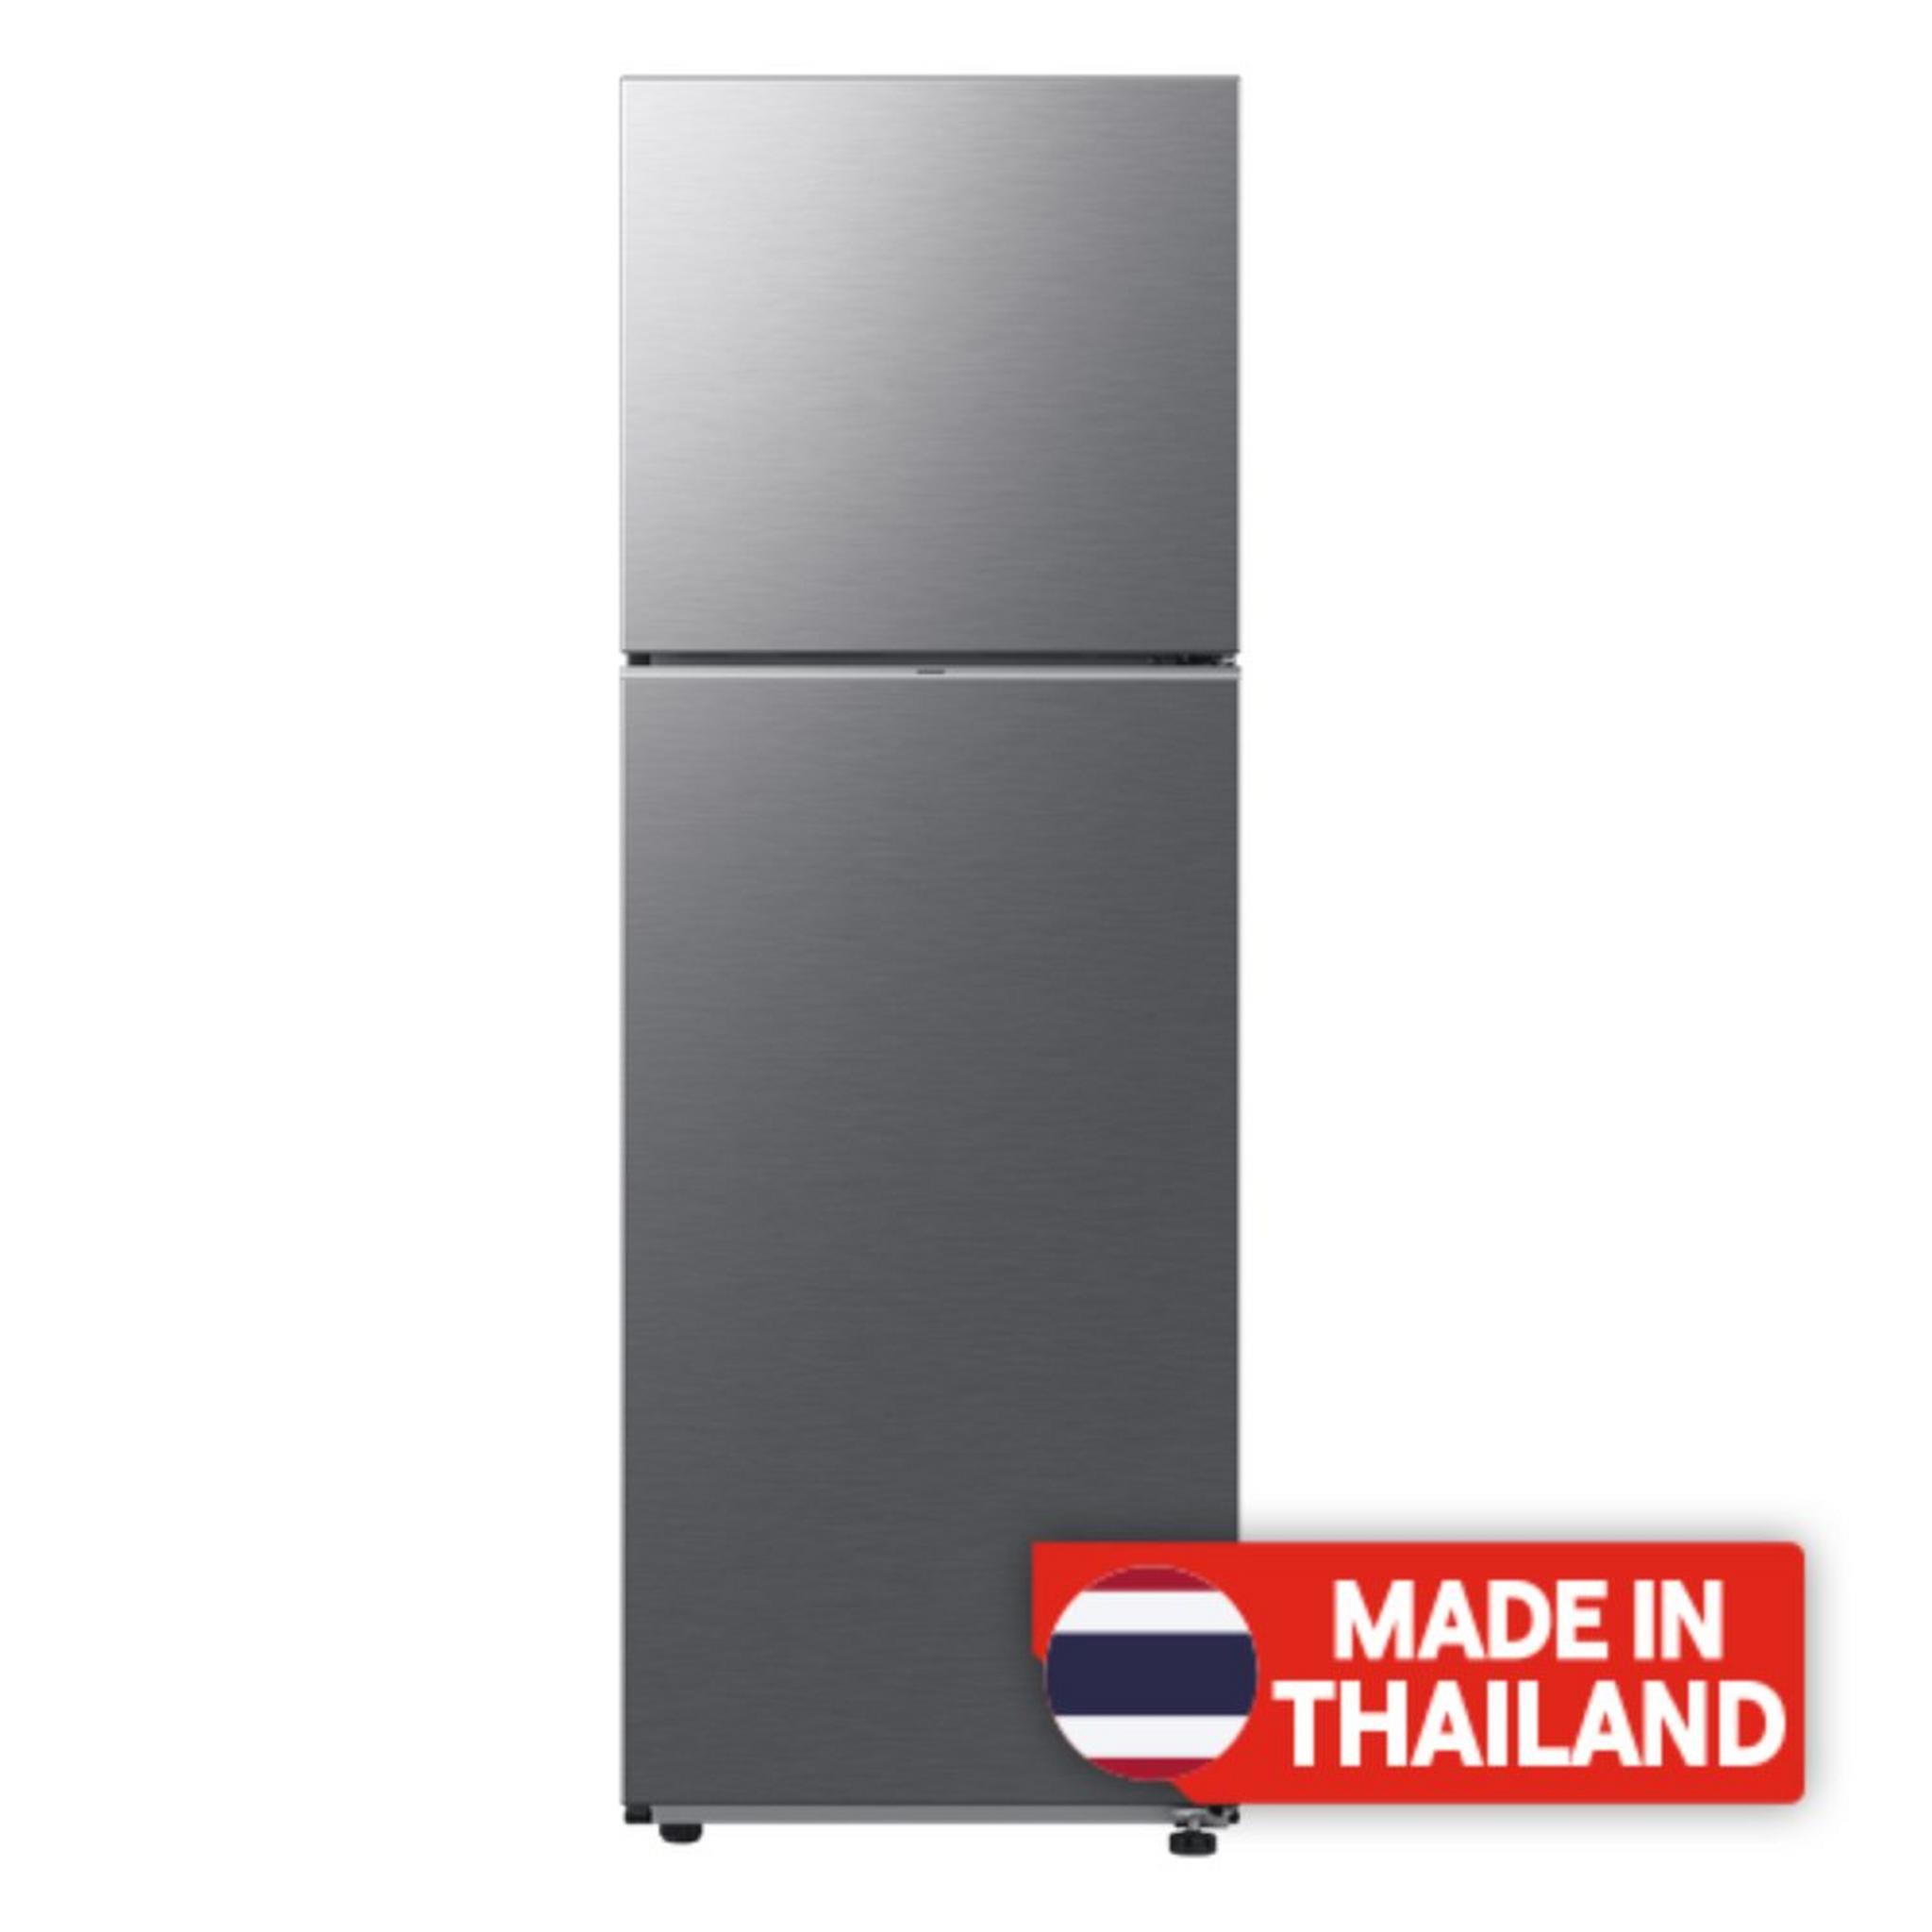 Samsung Top Mount Refrigerator, 15.9CFT, 450-Liters, Rt45cg5400s9 - Silver